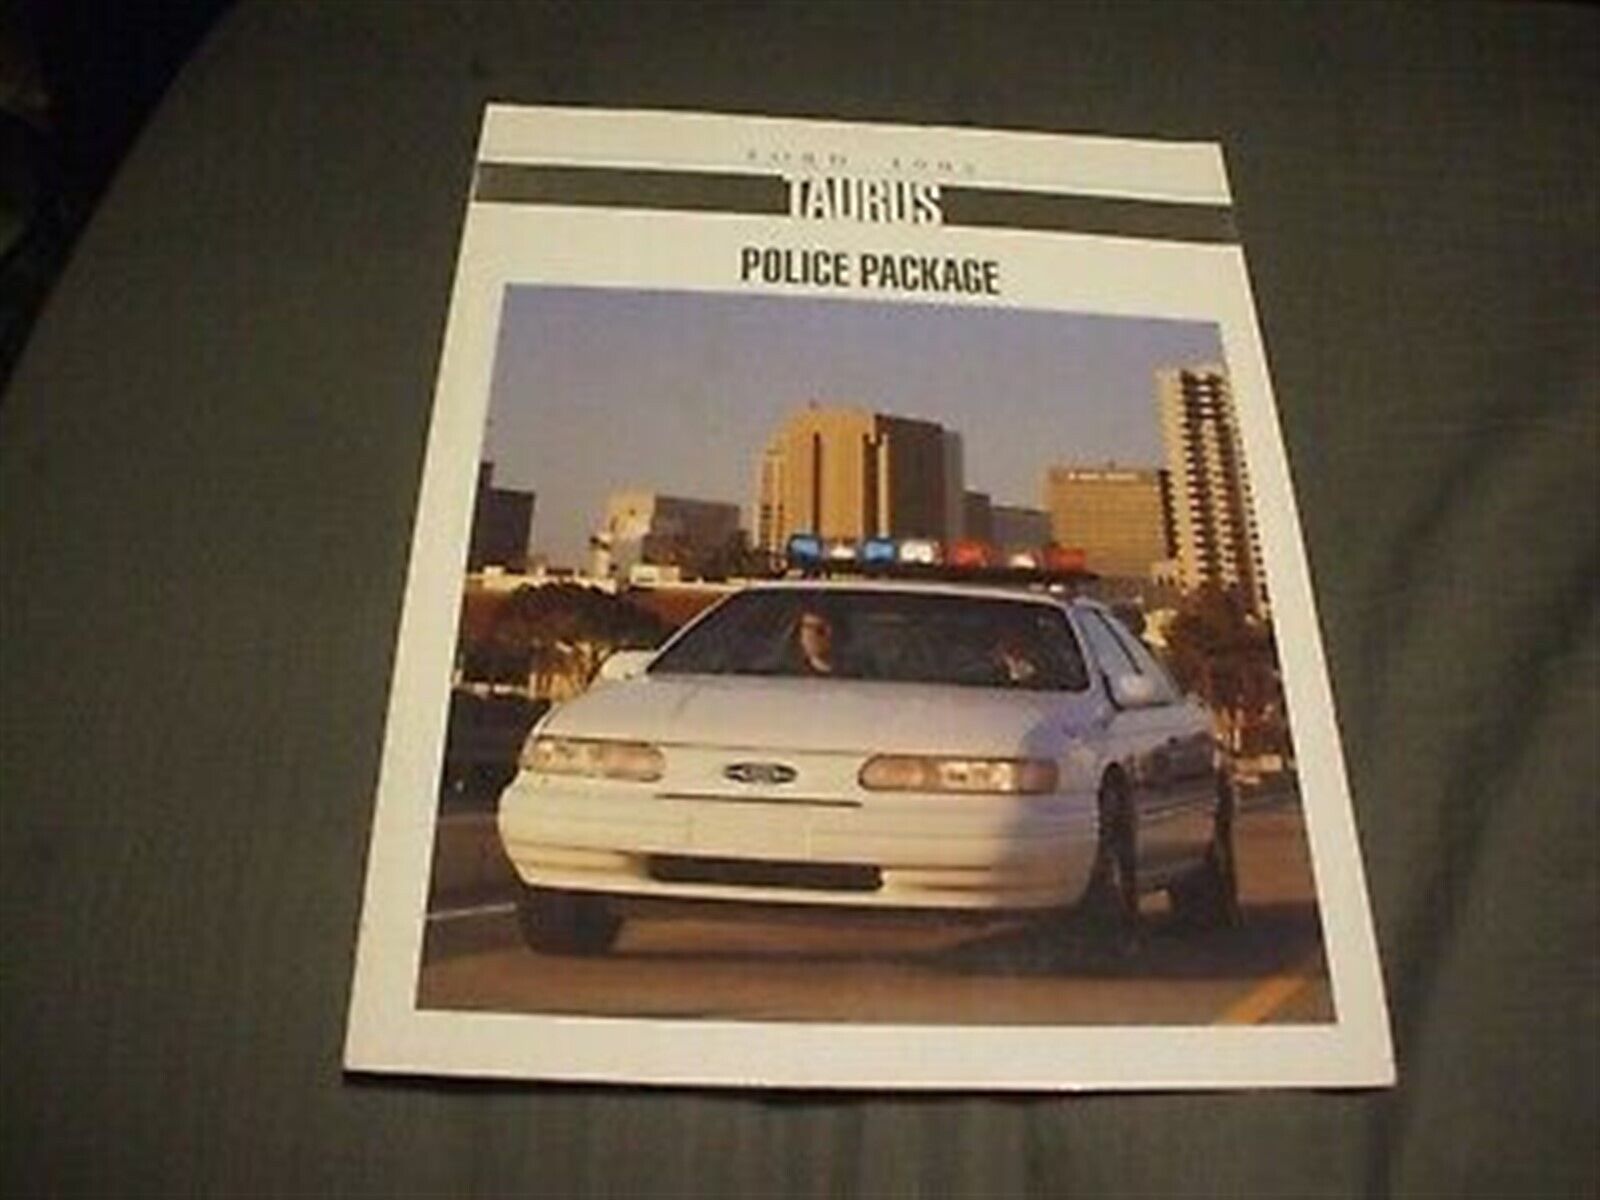 1994 FORD TAURUS POLICE PACKAGE Brochure Catalog - POLICE CAR 